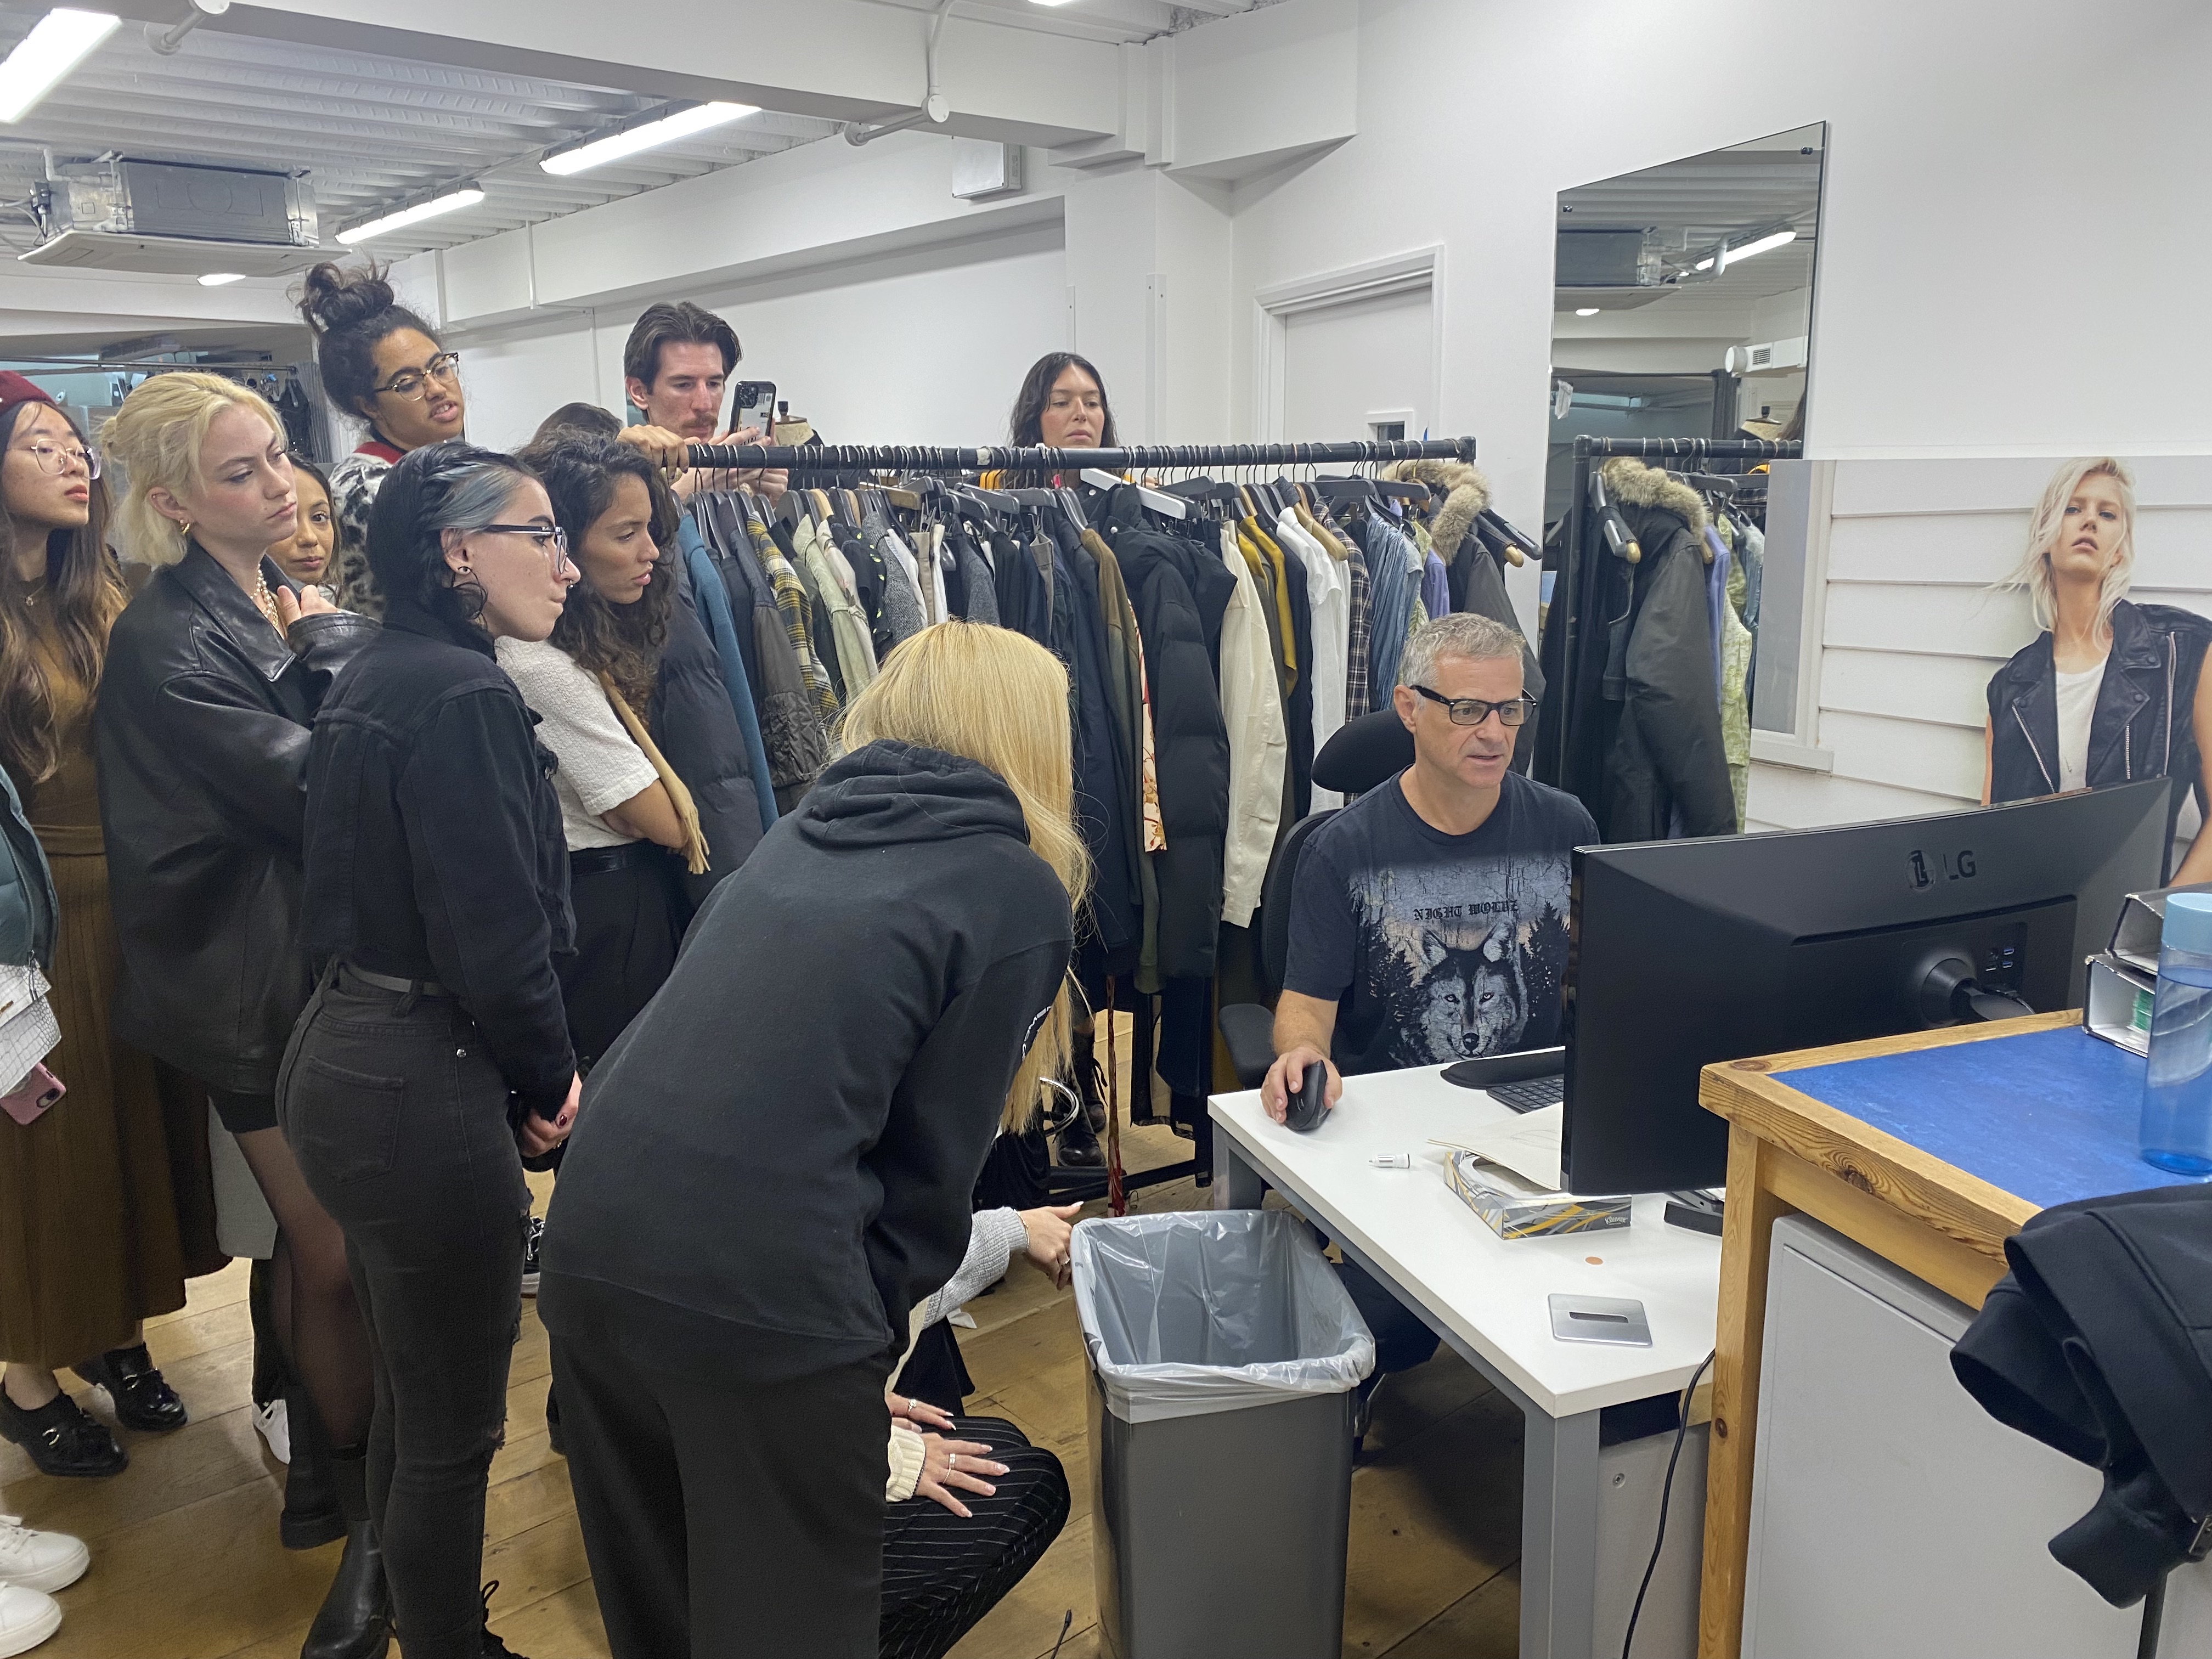 FIDM grad Cassidy Sobey with FIDM students at AllSaints fashion headquarters in London England